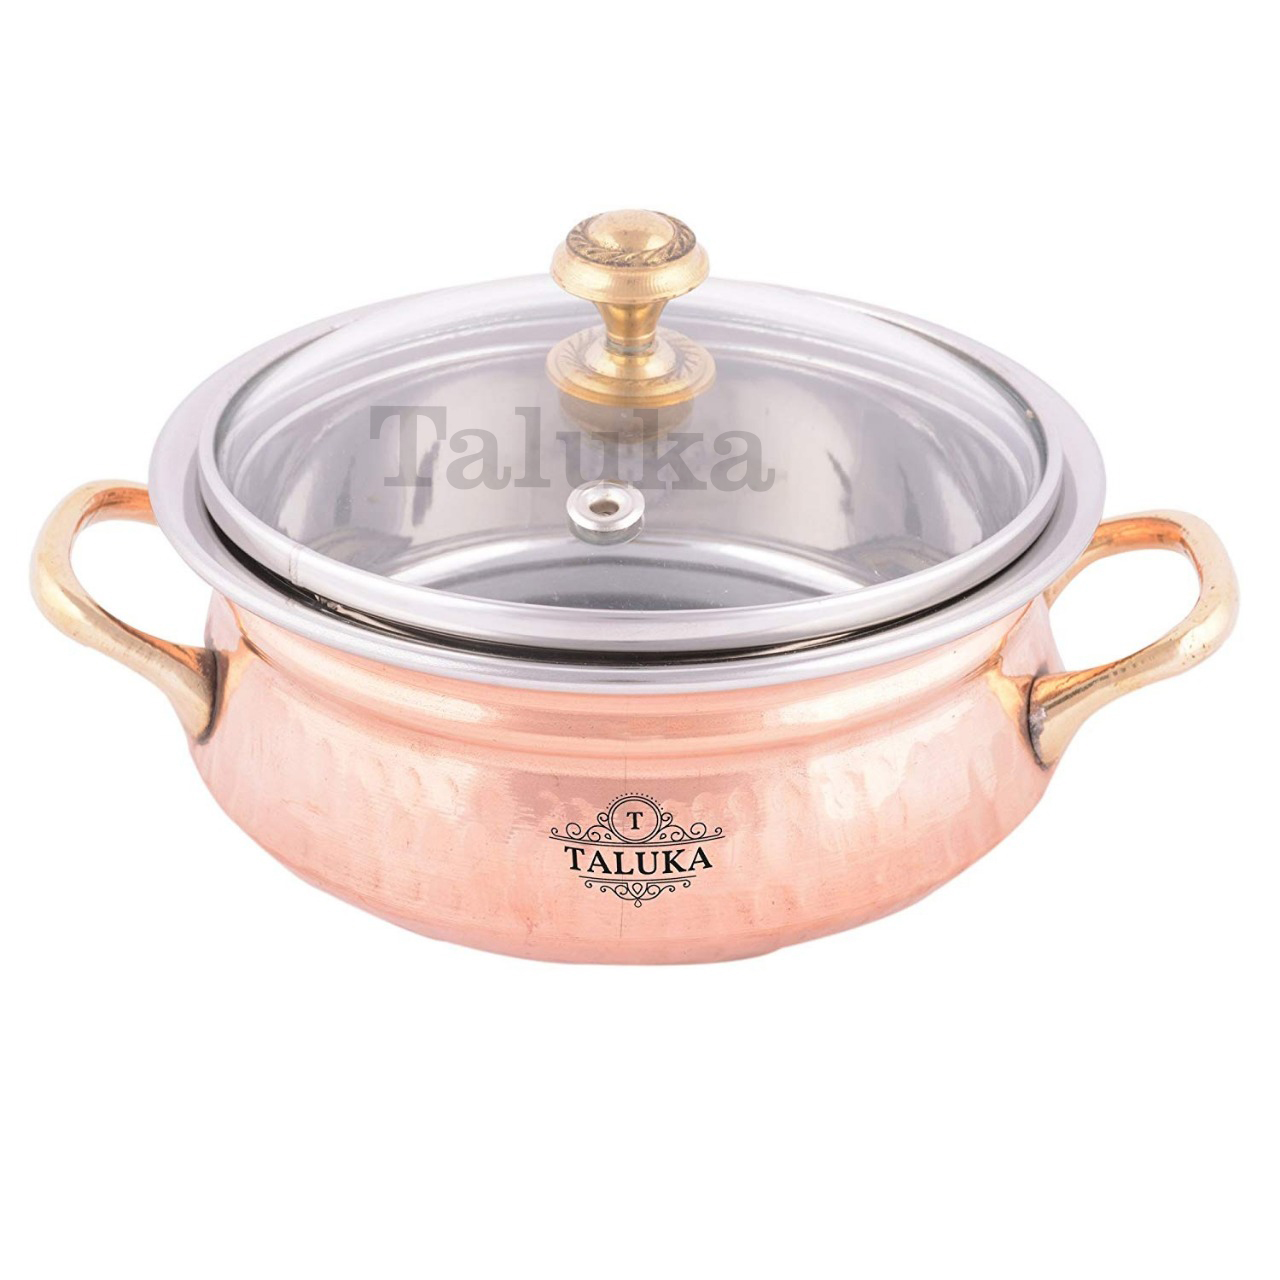 Taluka Pure Copper Handmade Designer Hammered Copper Casserole with Glass Lid Set of 4 Casserole with Serving Spoon for Serving Restaurant Hotel Home Ware Capacity :- 600 ml Each